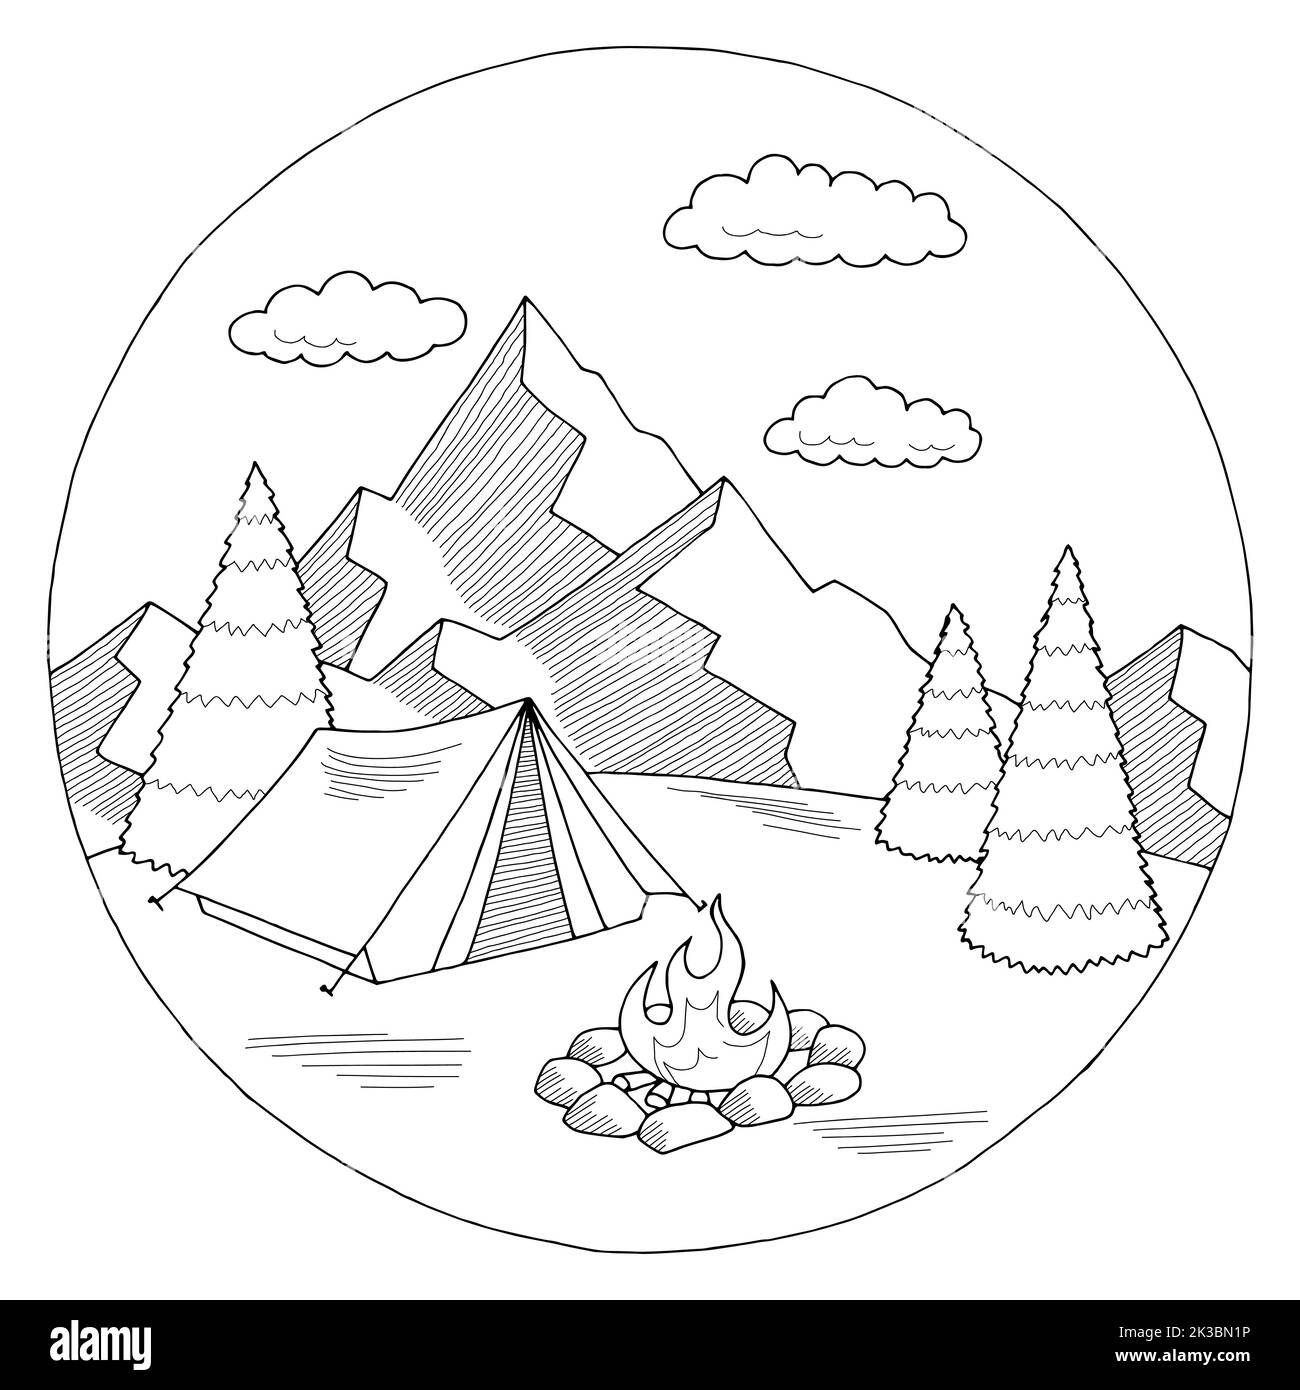 Camping round frame range graphic black white circle mountain landscape isolated sketch illustration vector Stock Vector